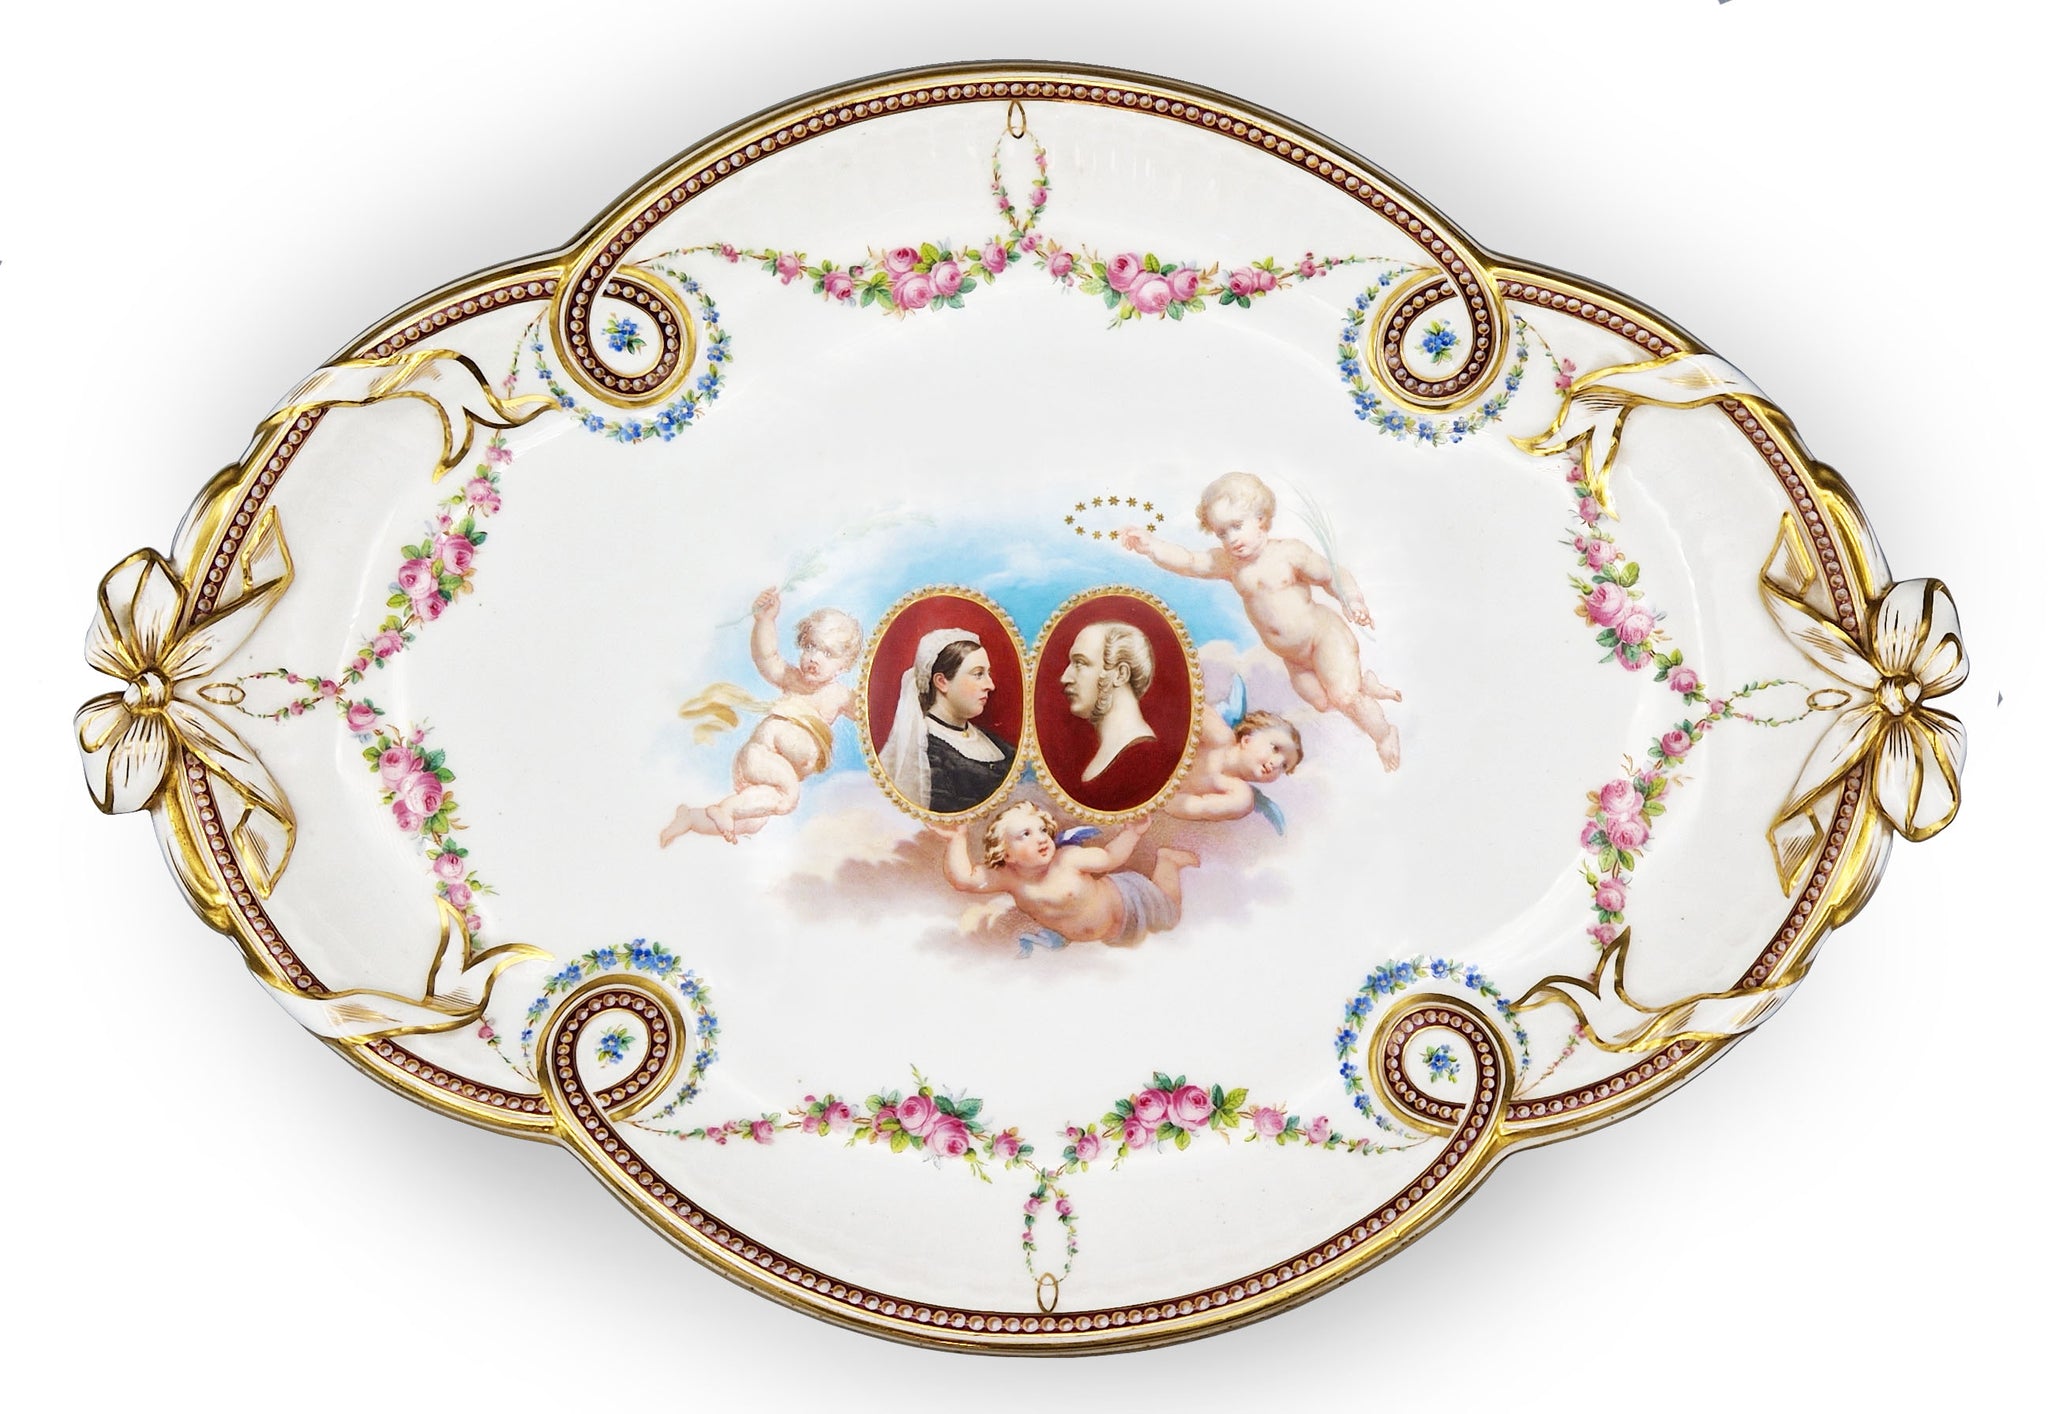 Rare Minton Porcelain 'Queen Victoria & Prince Albert' Tray in the French Style c.1870, shown at the London  Exhibition 1871 by Thomas Goode & Co.